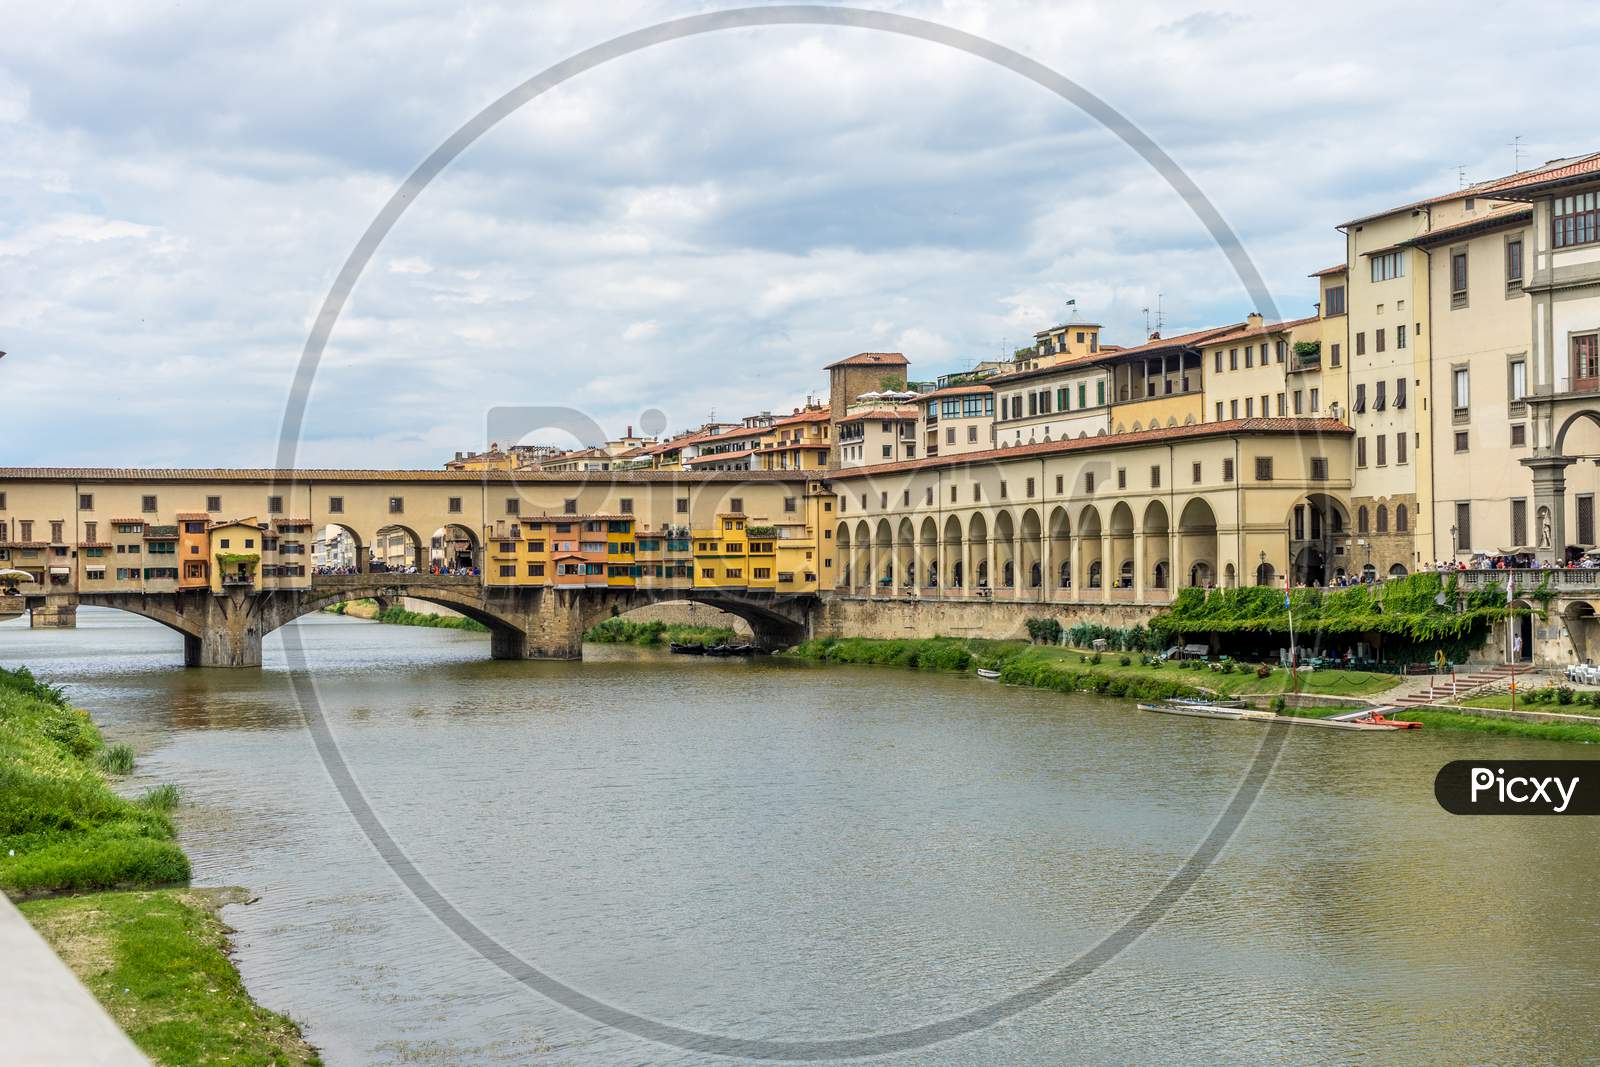 The Ponte Vecchio Over The Arno River In Florence, Italy